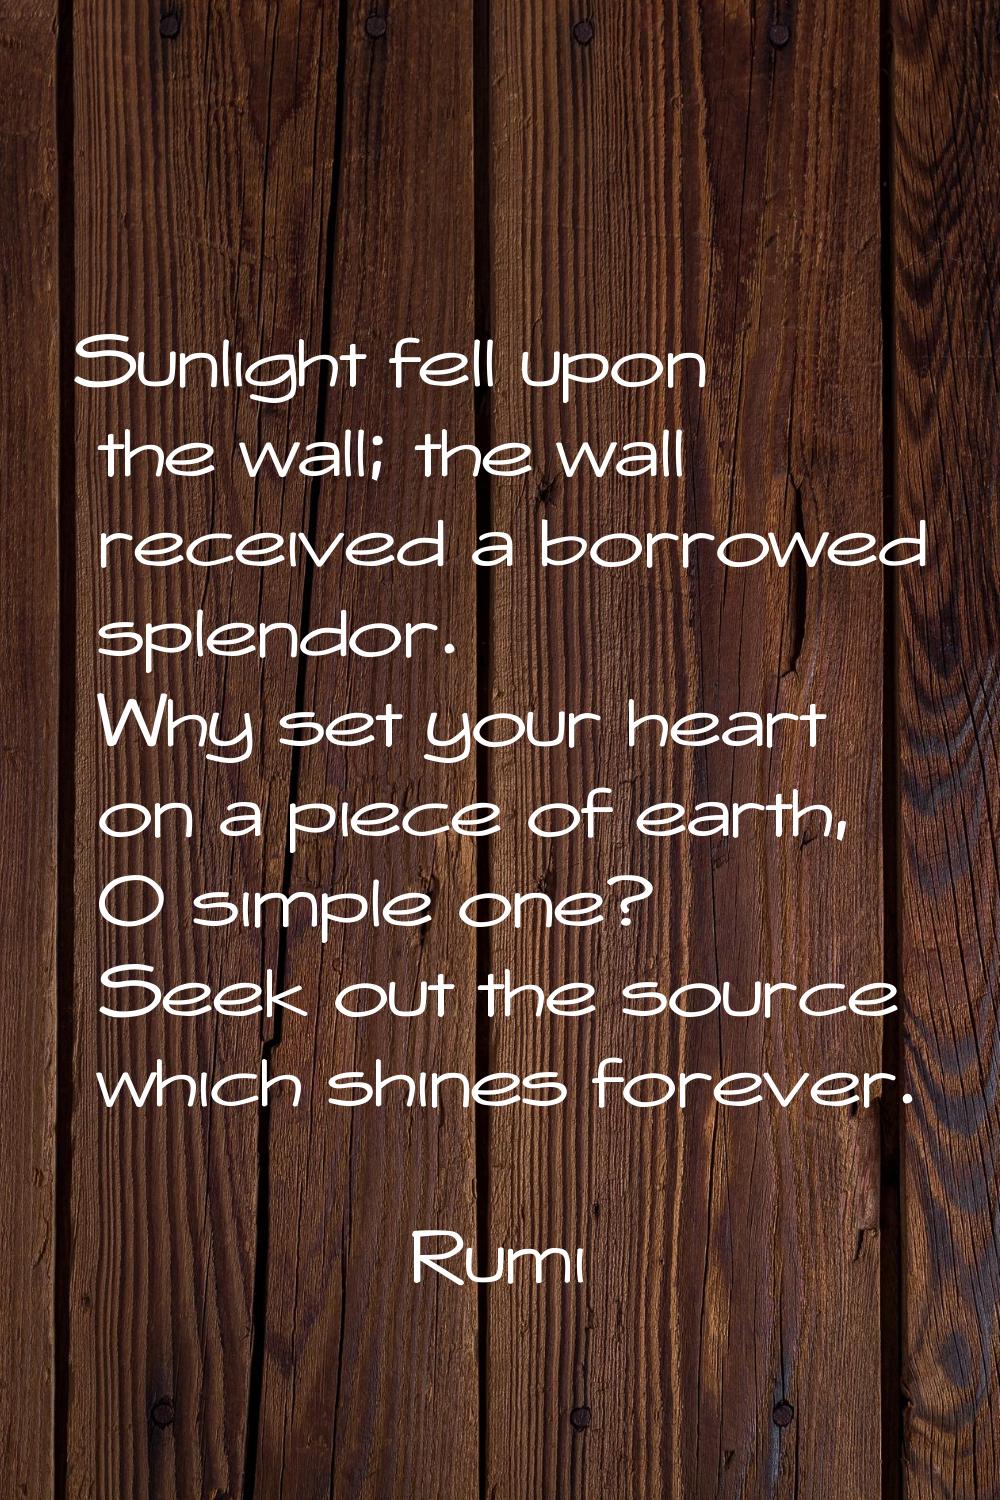 Sunlight fell upon the wall; the wall received a borrowed splendor. Why set your heart on a piece o